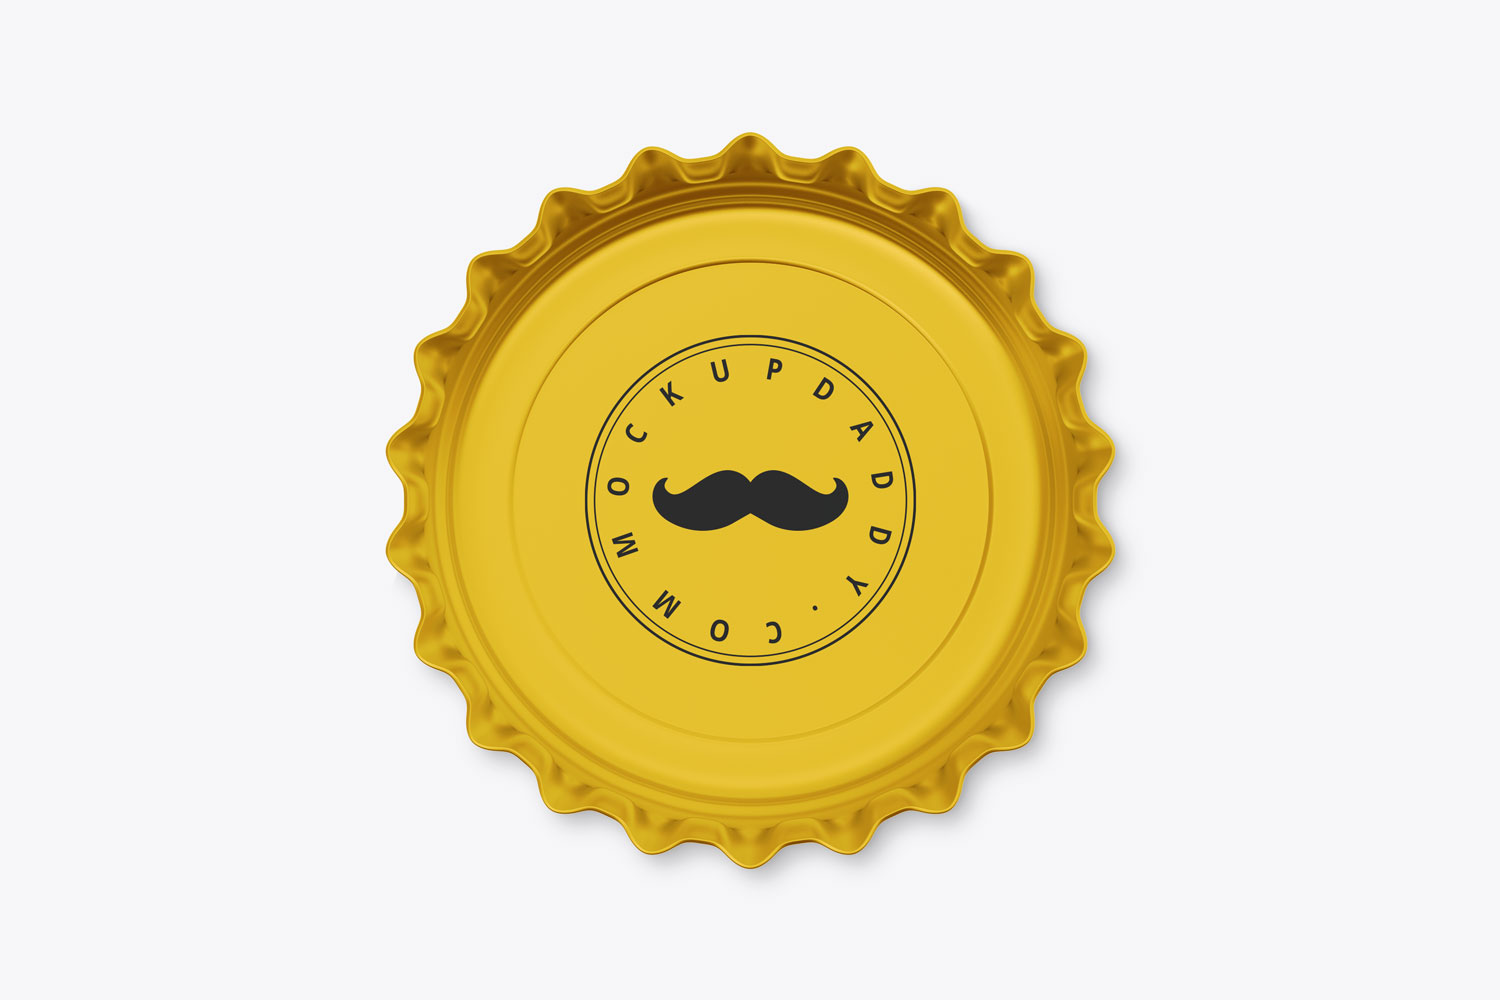 Yellow bottle cap mockup with mustache from back side.